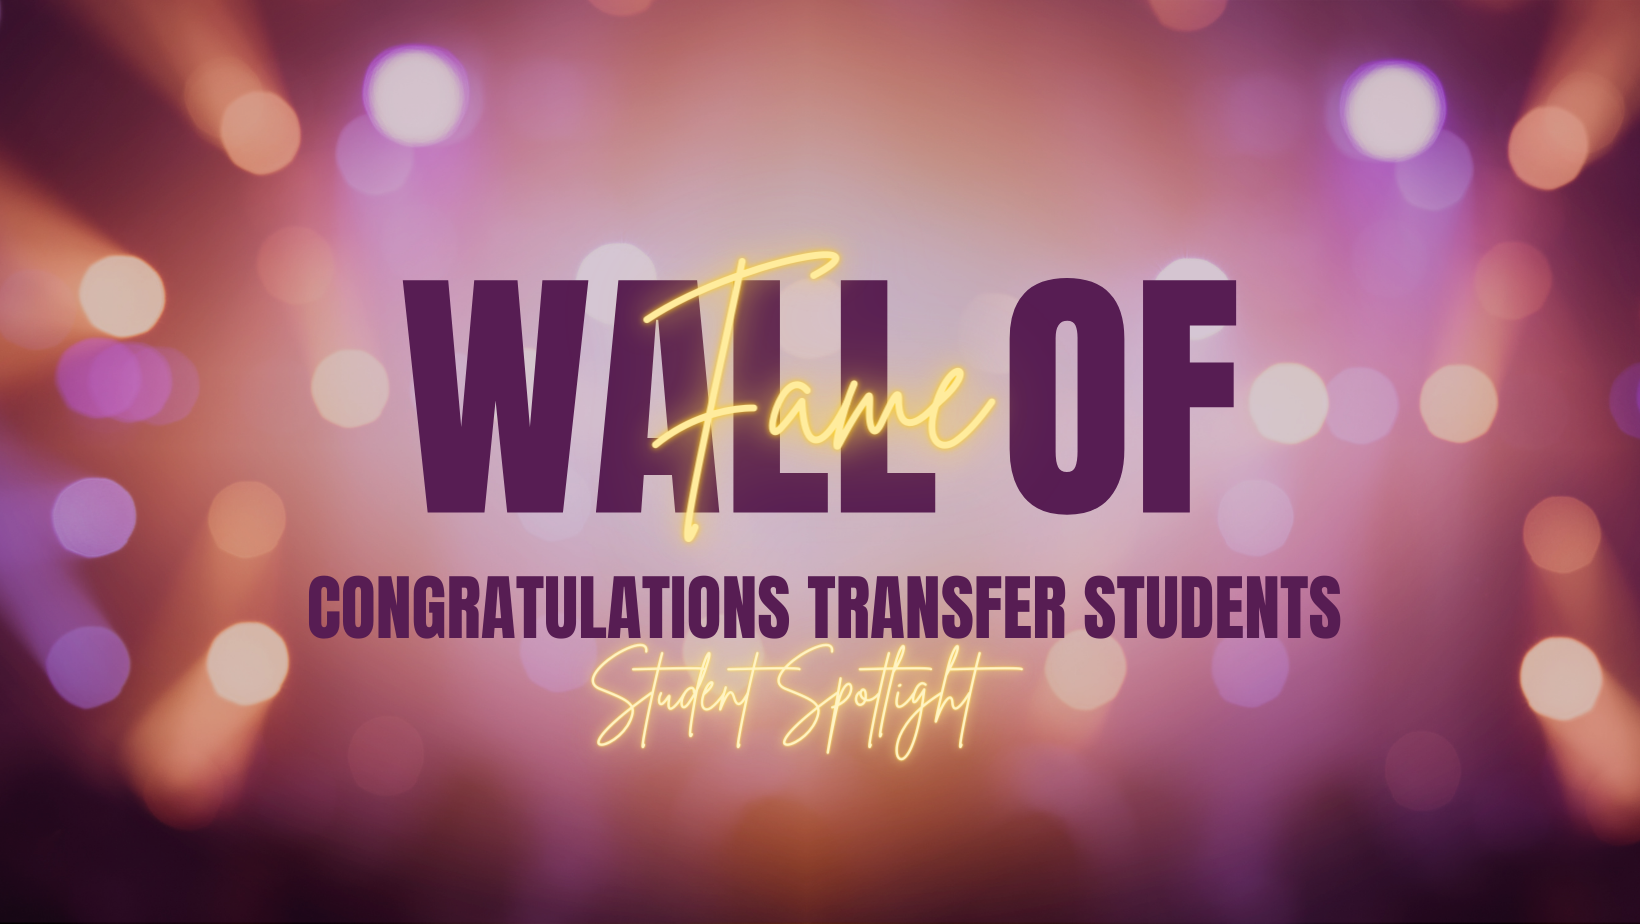 Wall of Fame Congratulations Transfer Students